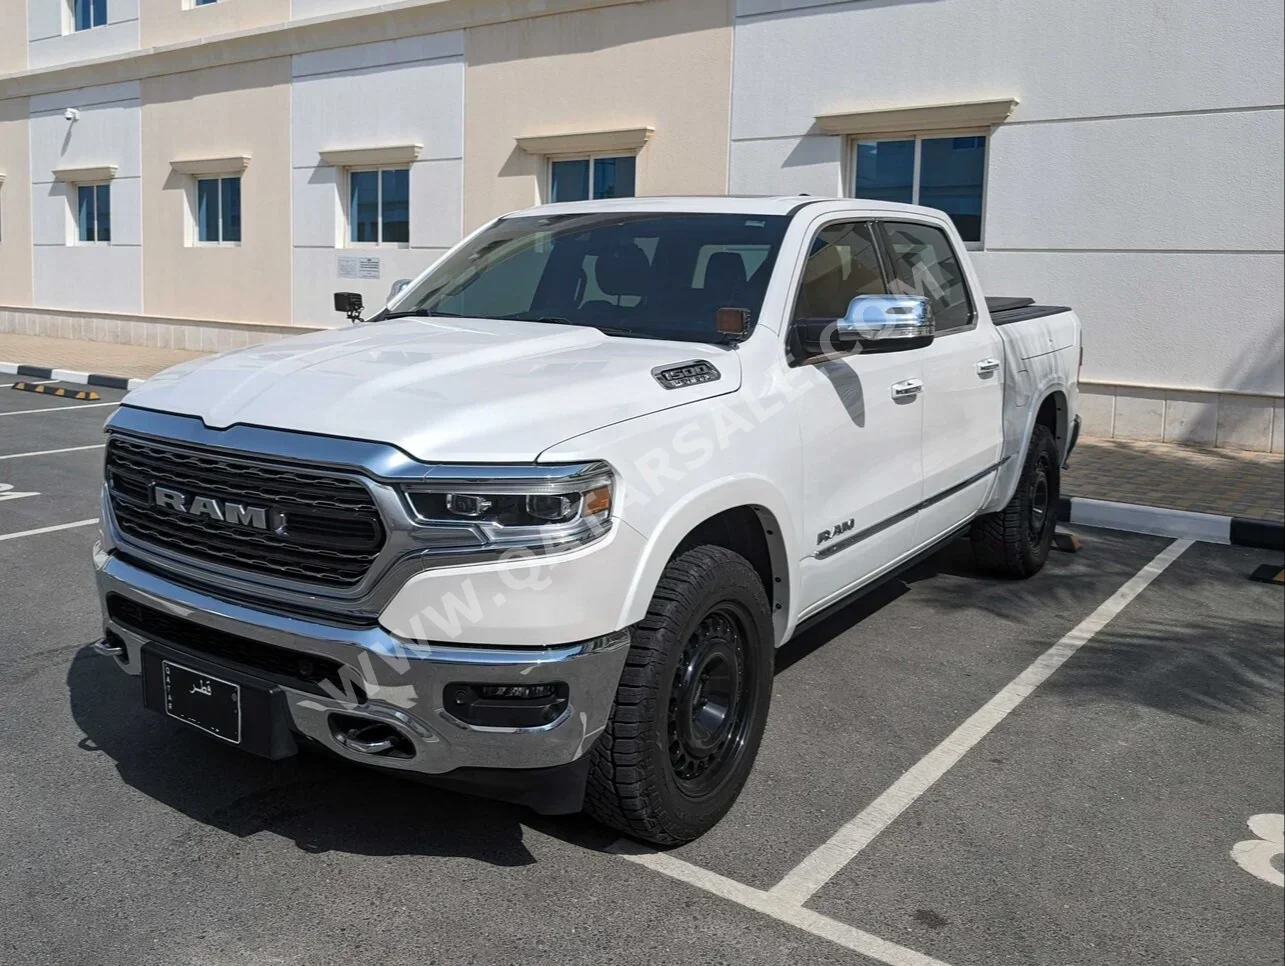 Dodge  Ram  Limited  2021  Automatic  24,000 Km  8 Cylinder  Four Wheel Drive (4WD)  Pick Up  White  With Warranty